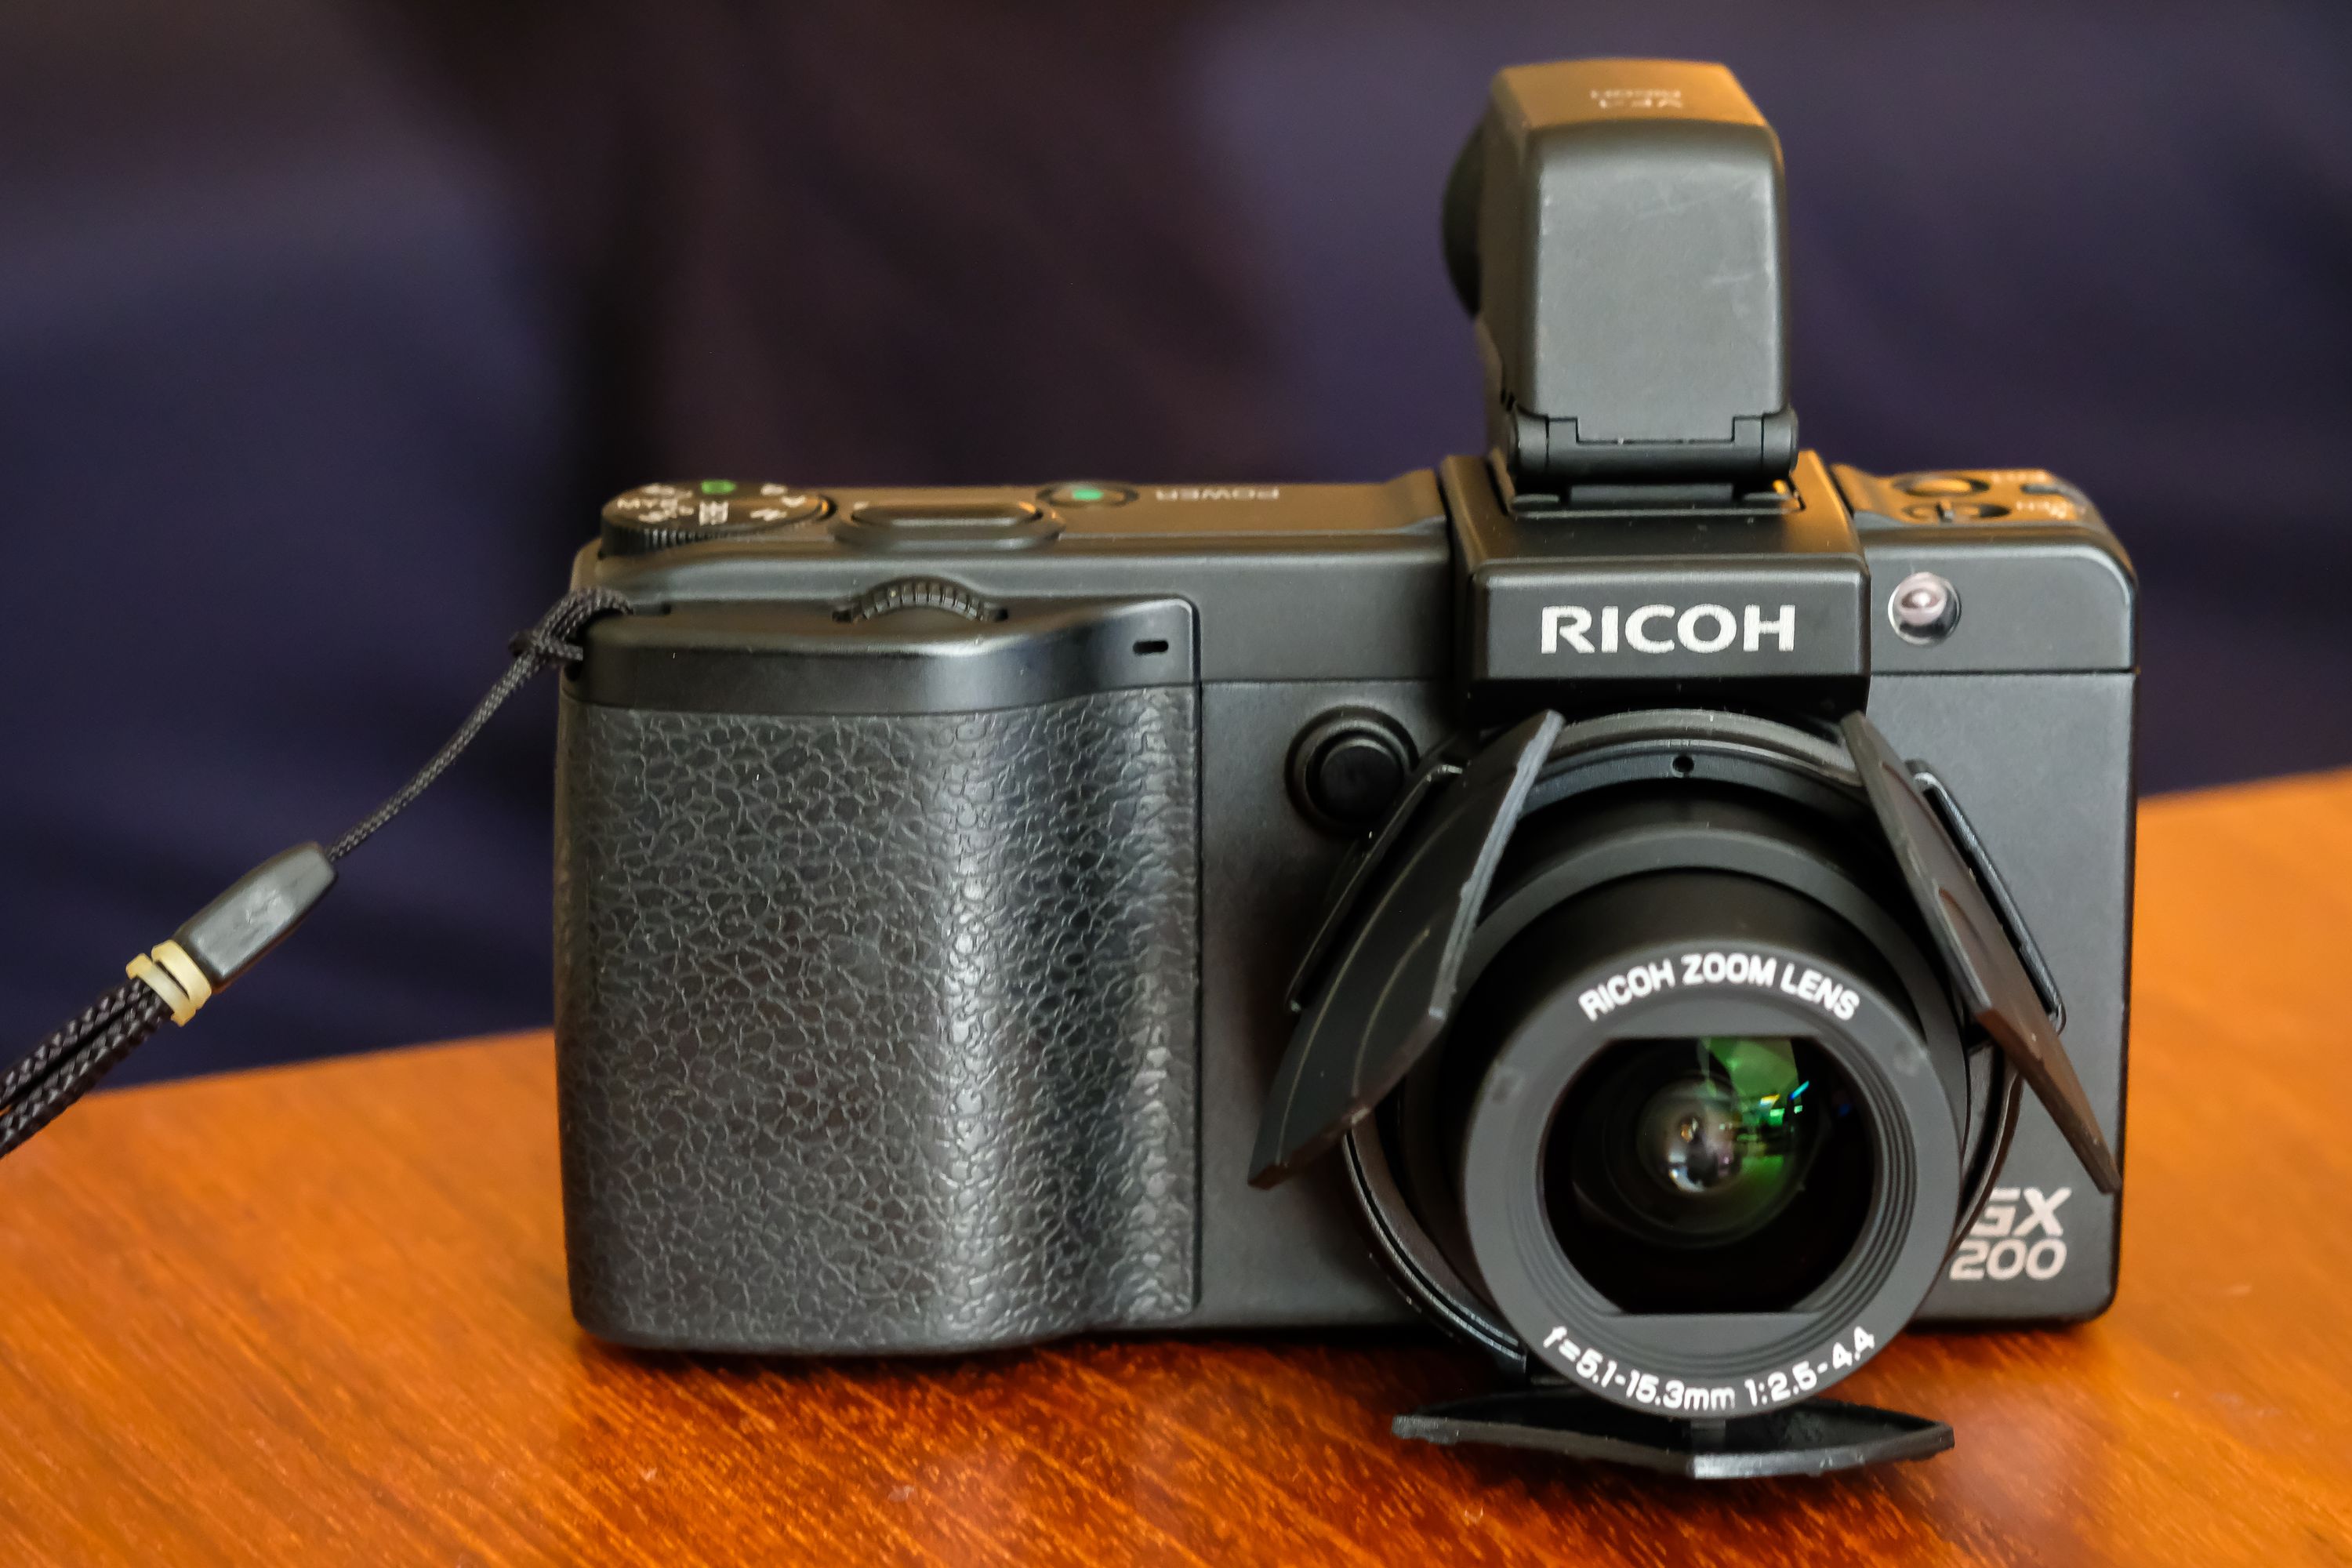 Ricoh GX200 with VF-1 Viewfinder